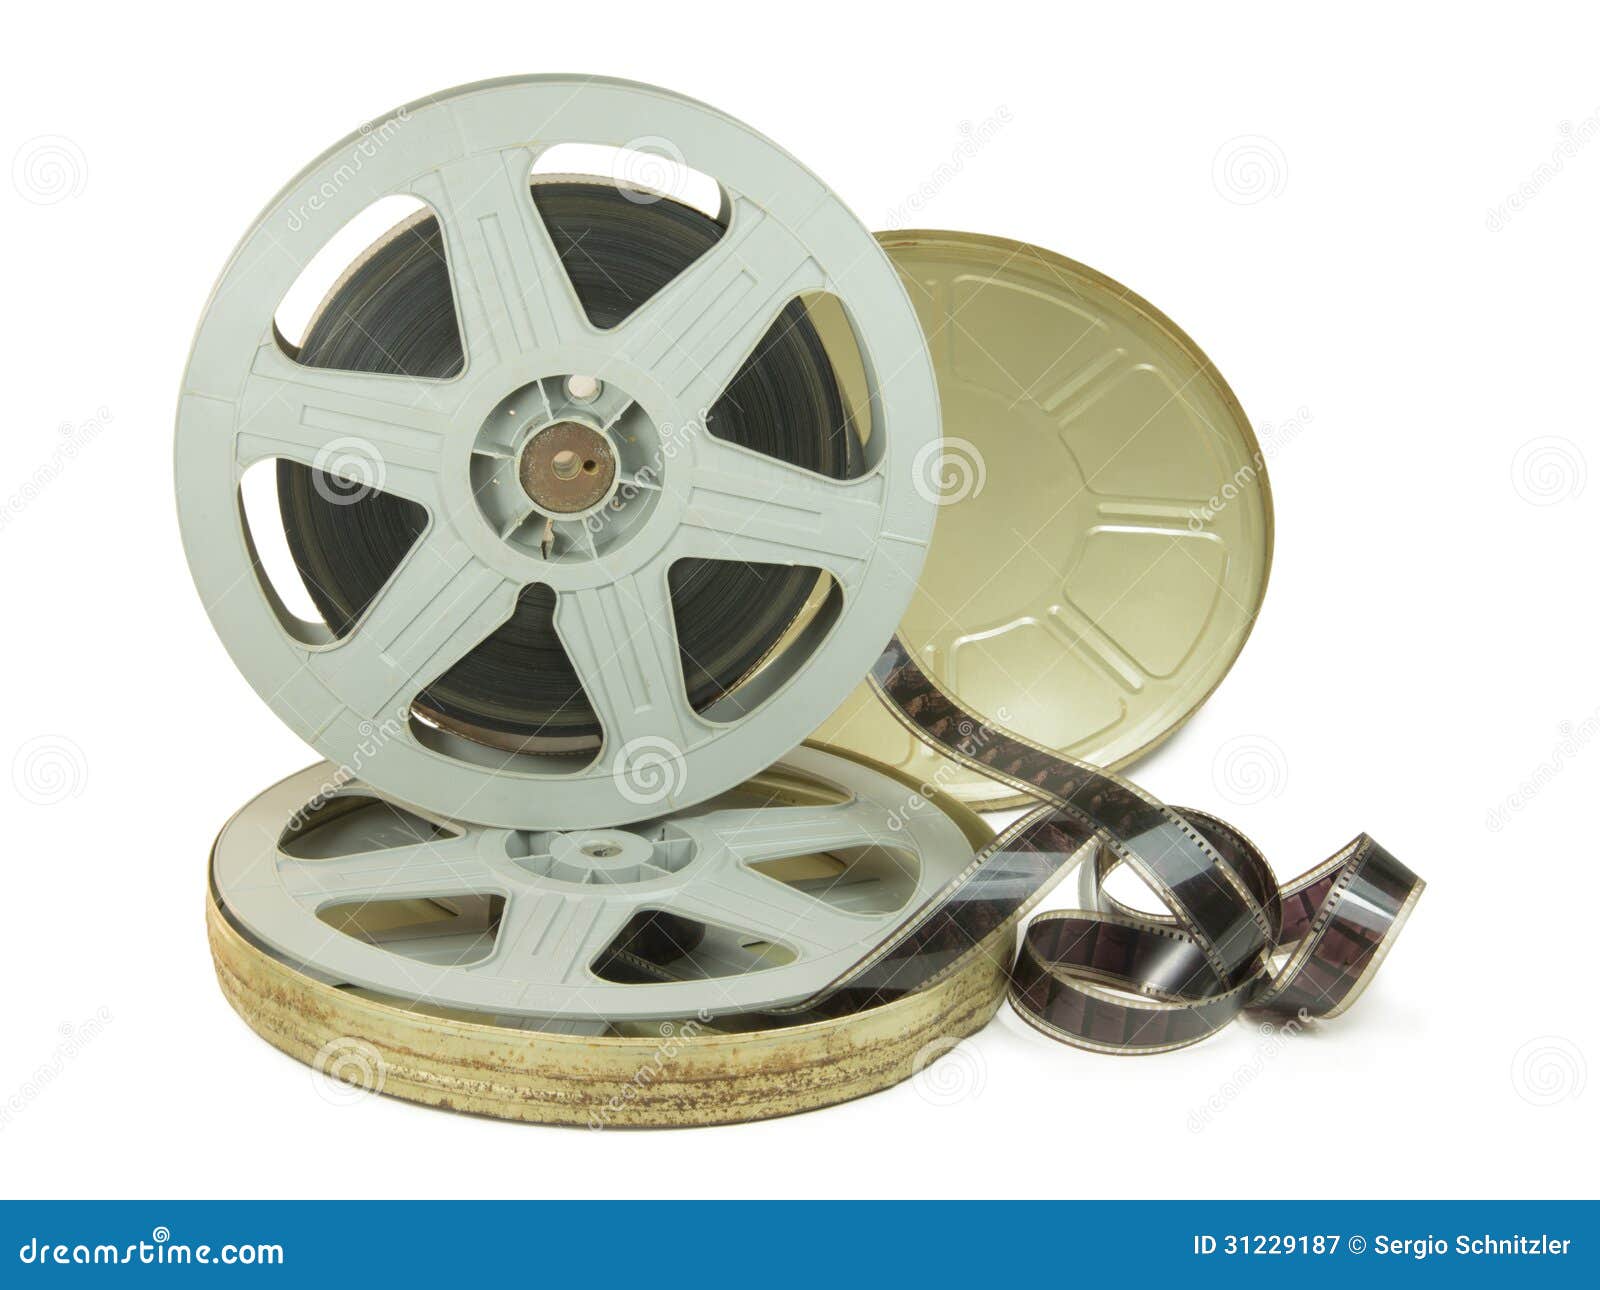 35mm Film In Two Reels And Its Can. A 35mm film in two reels and its rusty can, isolated over white, with clipping path